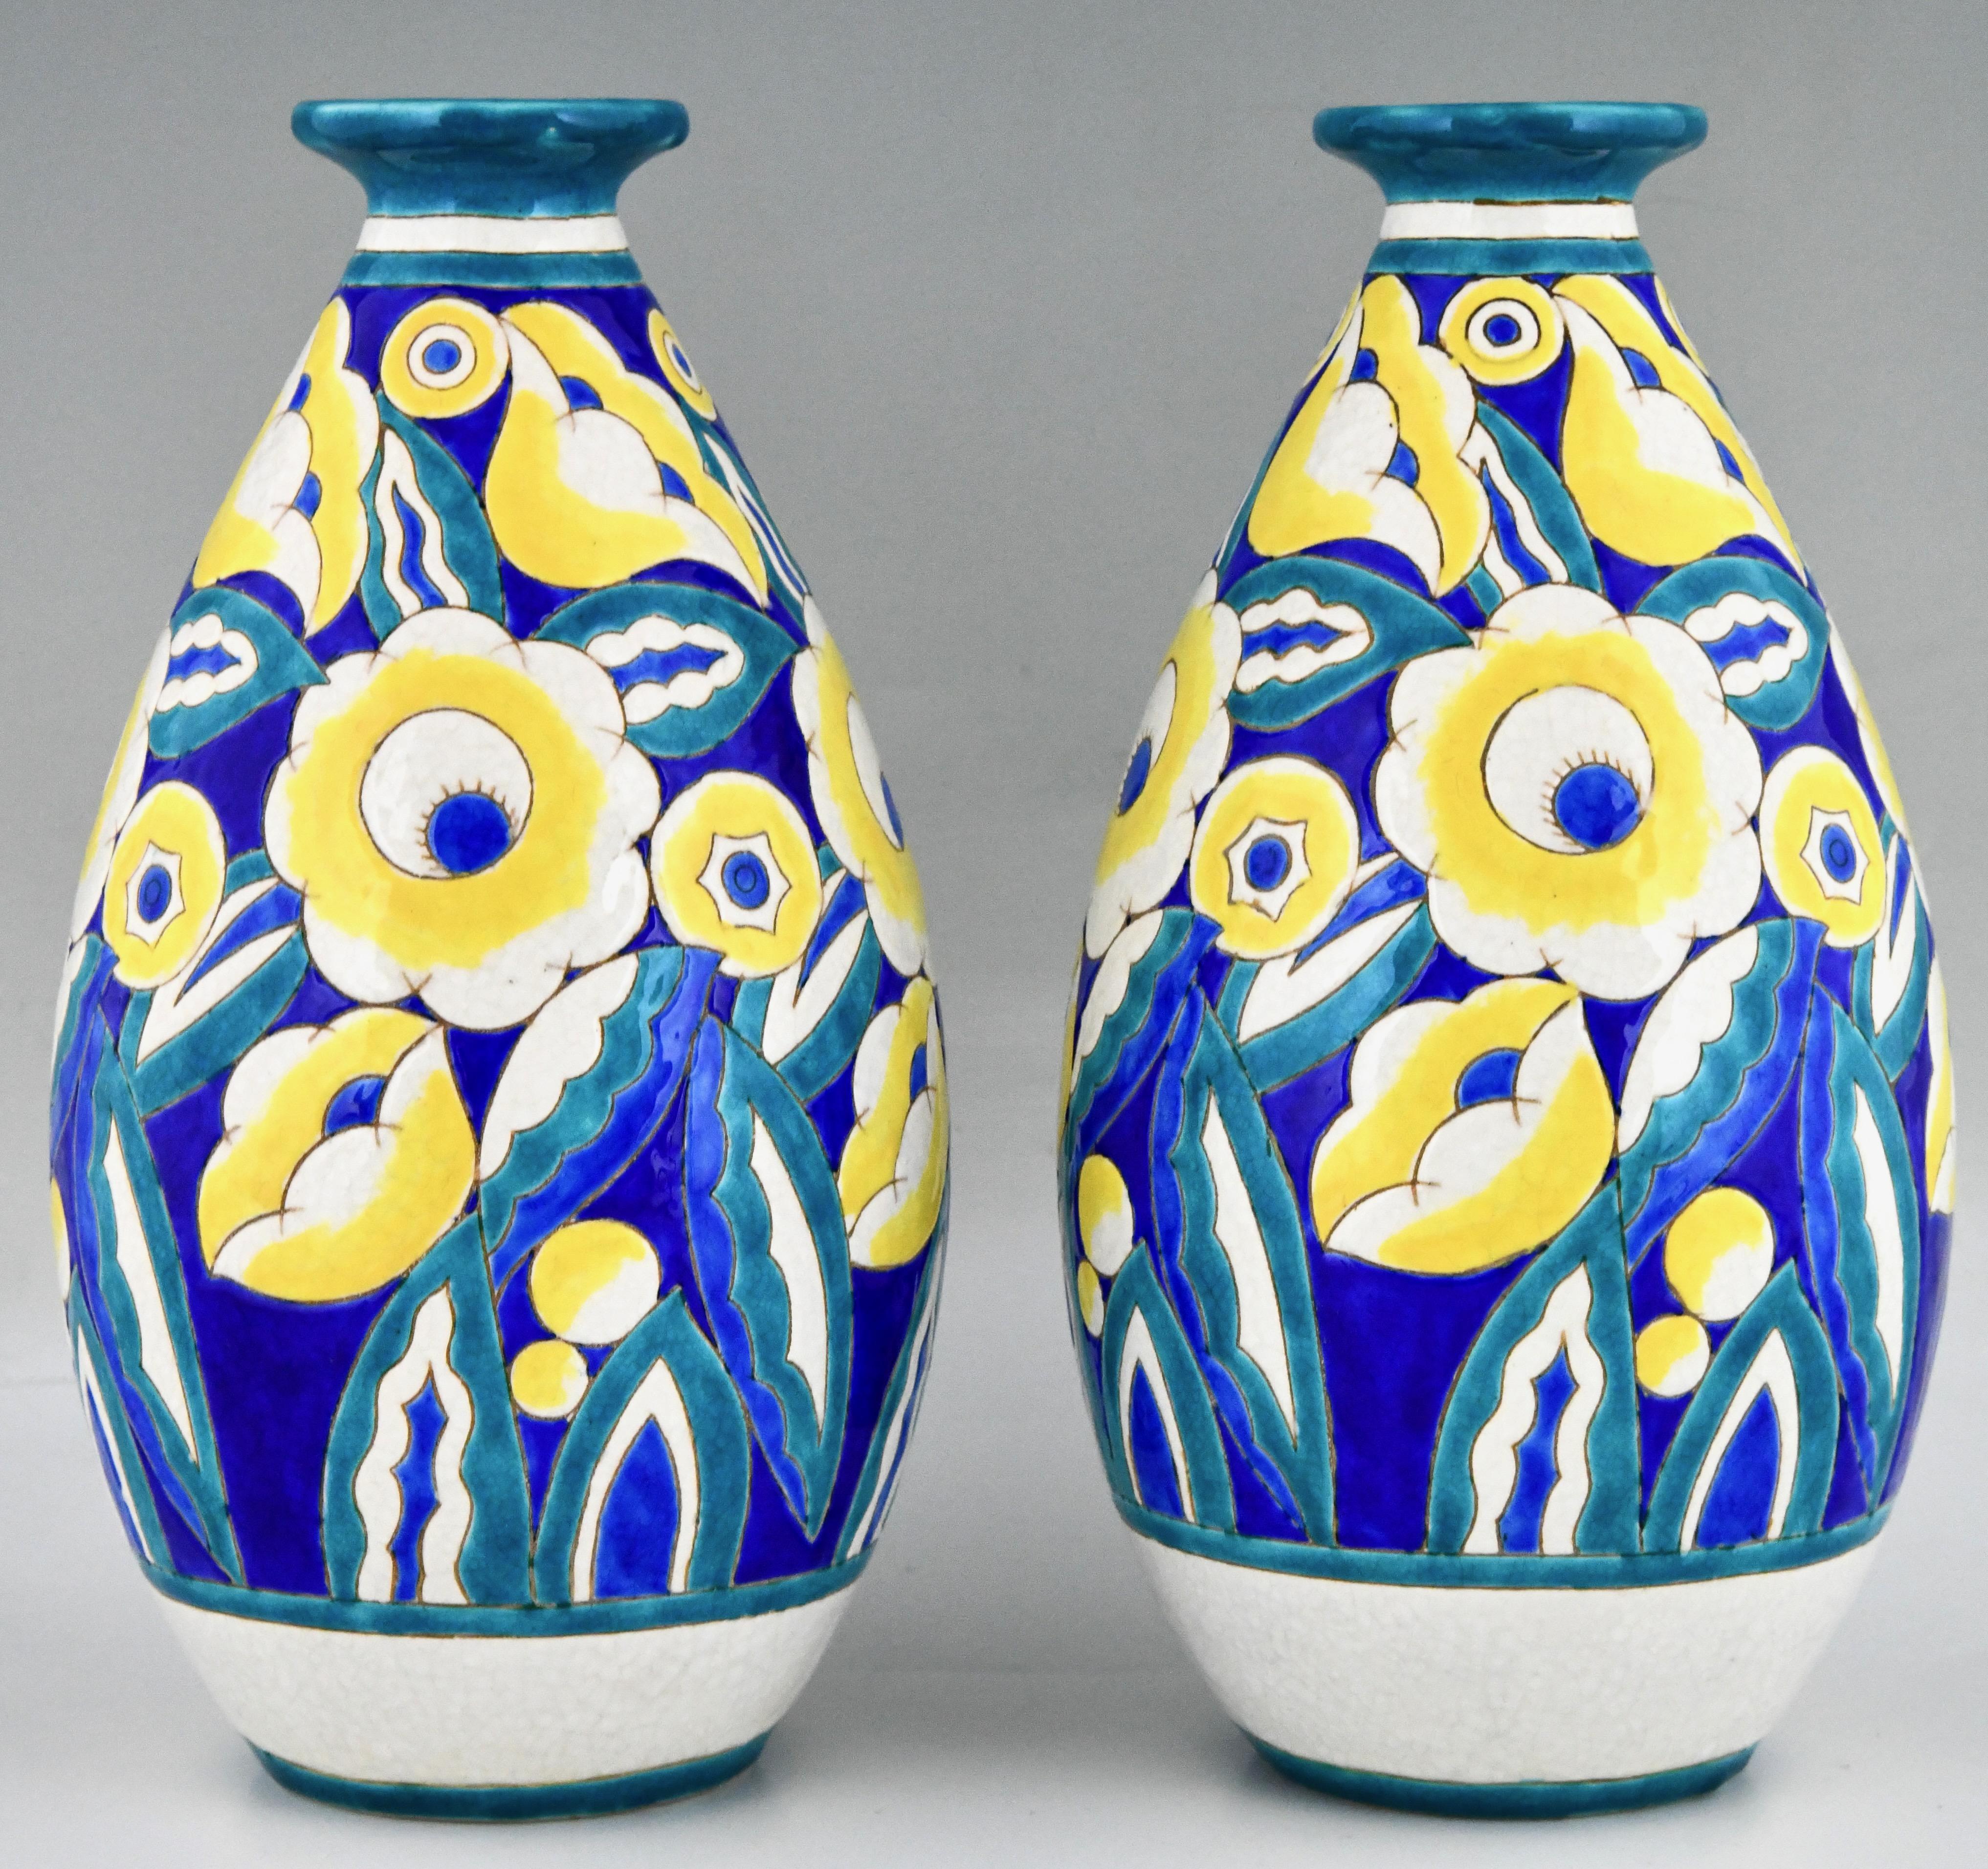 Pair of Art Deco ceramic vases with flowers by Keramis, Belgium.
Turquoise, blue, white and yellow craquelé ceramic. 
With the Keramis stamp en model number D1558 for the decor.
Marked, 22 and 960 for the shape. 
Belgium 1932. 
This decor is